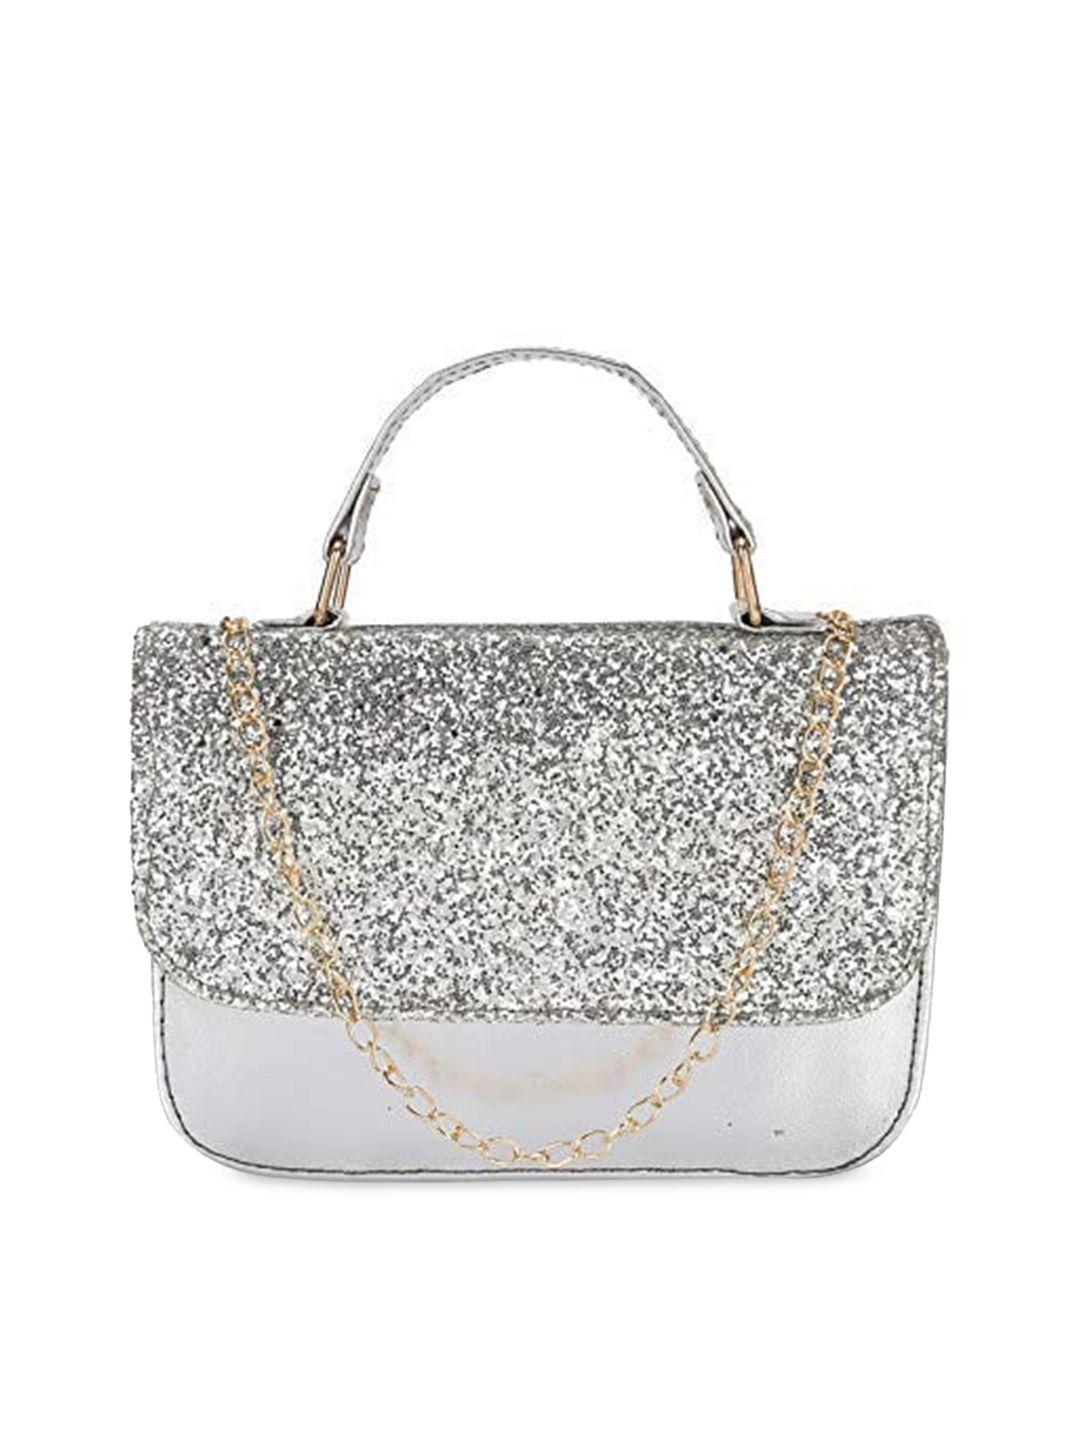 dn creation silver-toned embellished pu oversized structured tote bag